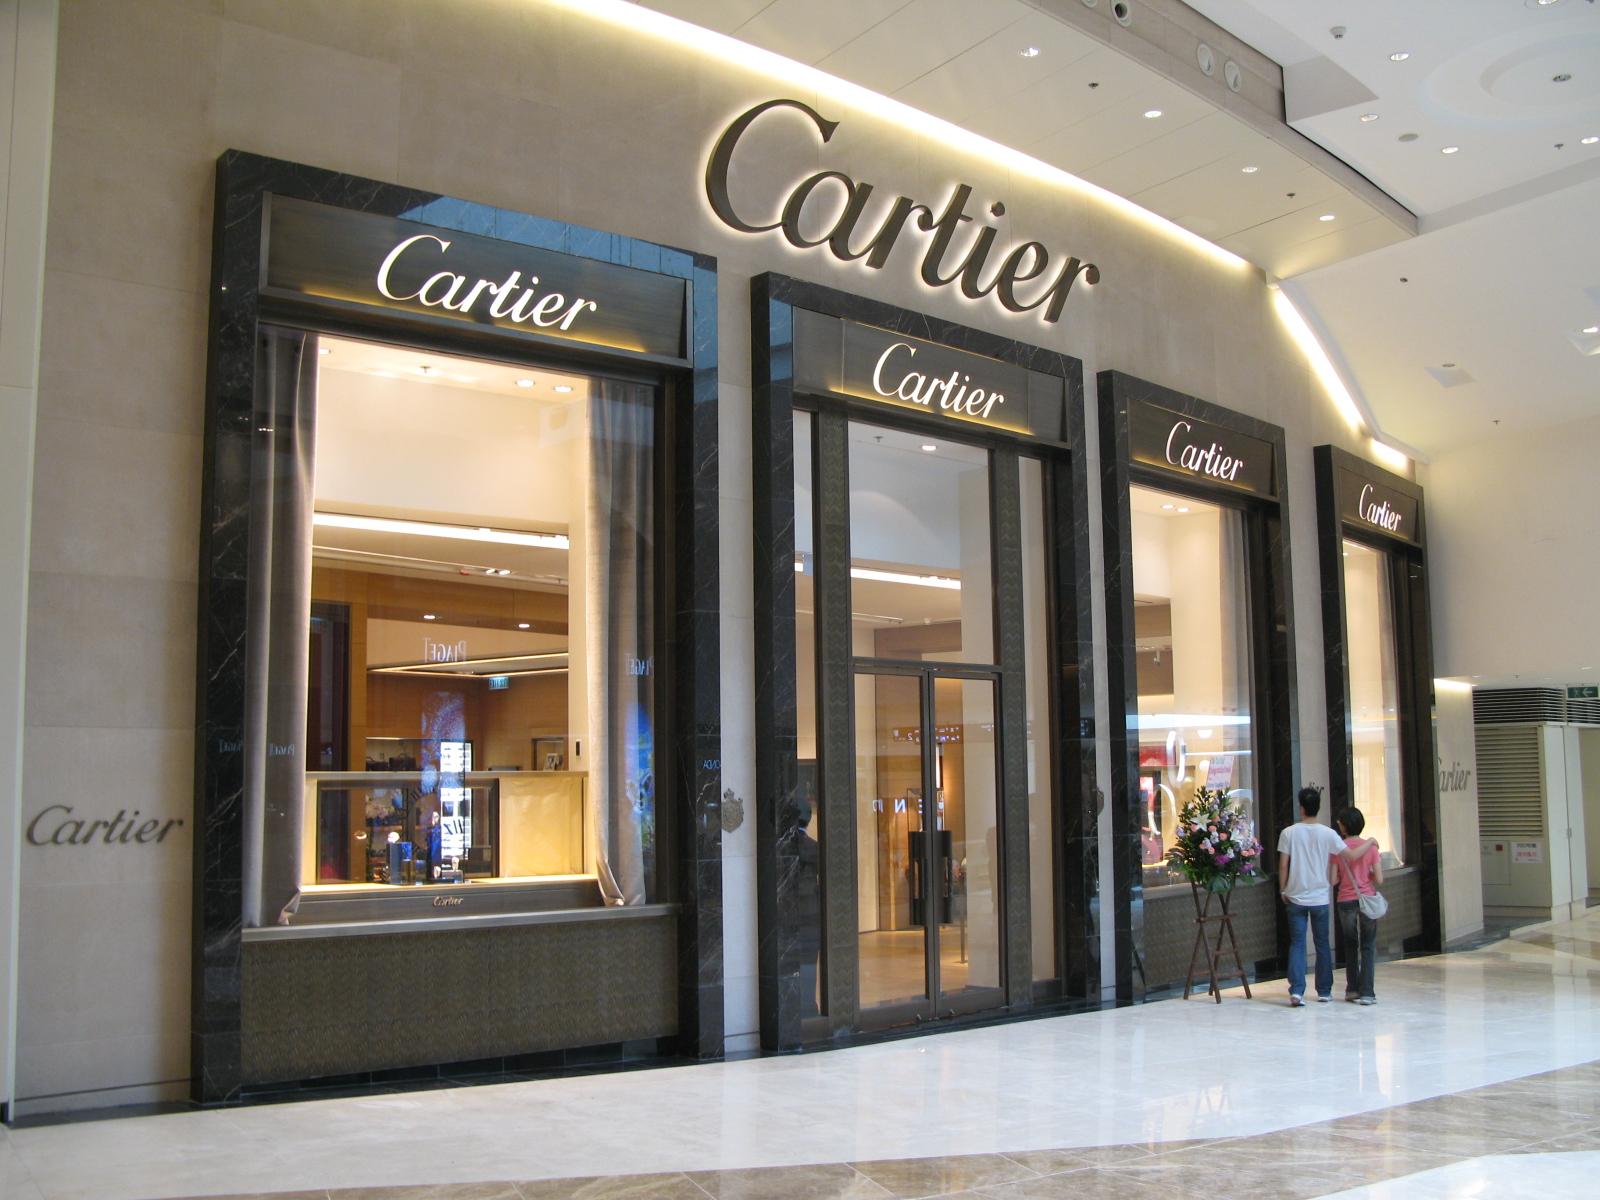 cartier company of which country